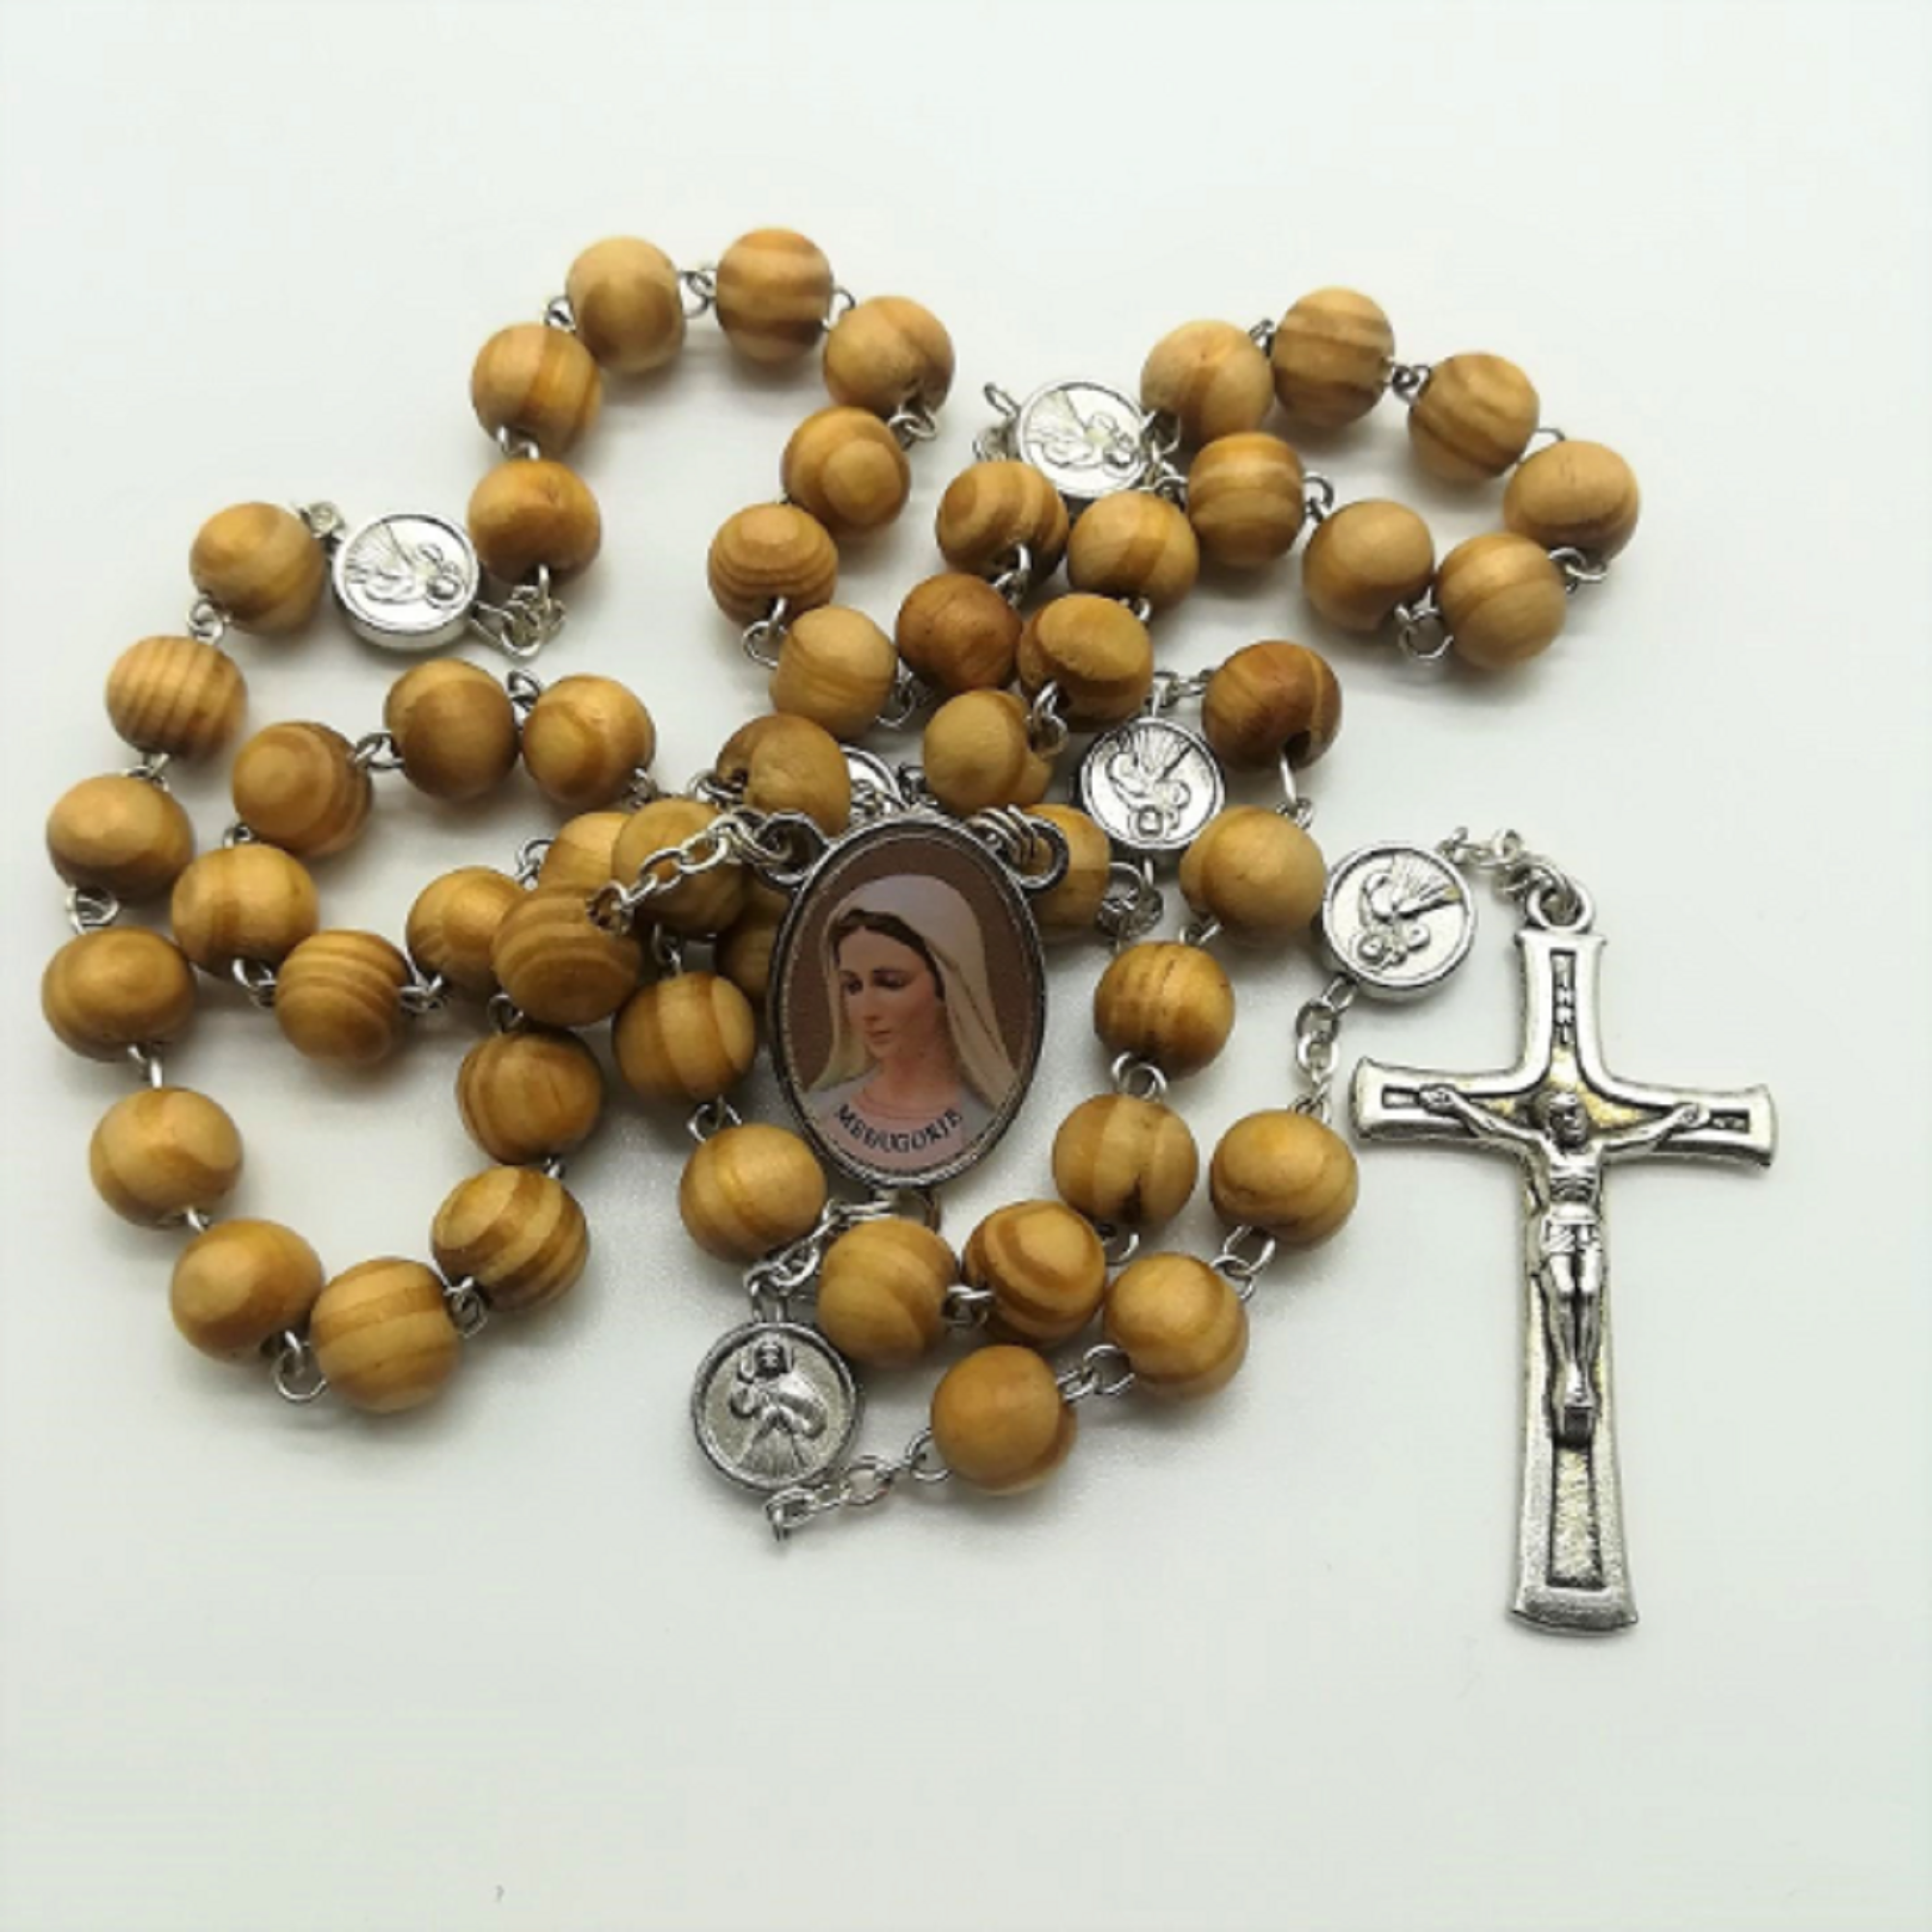 Virgin Mary / Divine Mercy Rosary - Wooden Beads